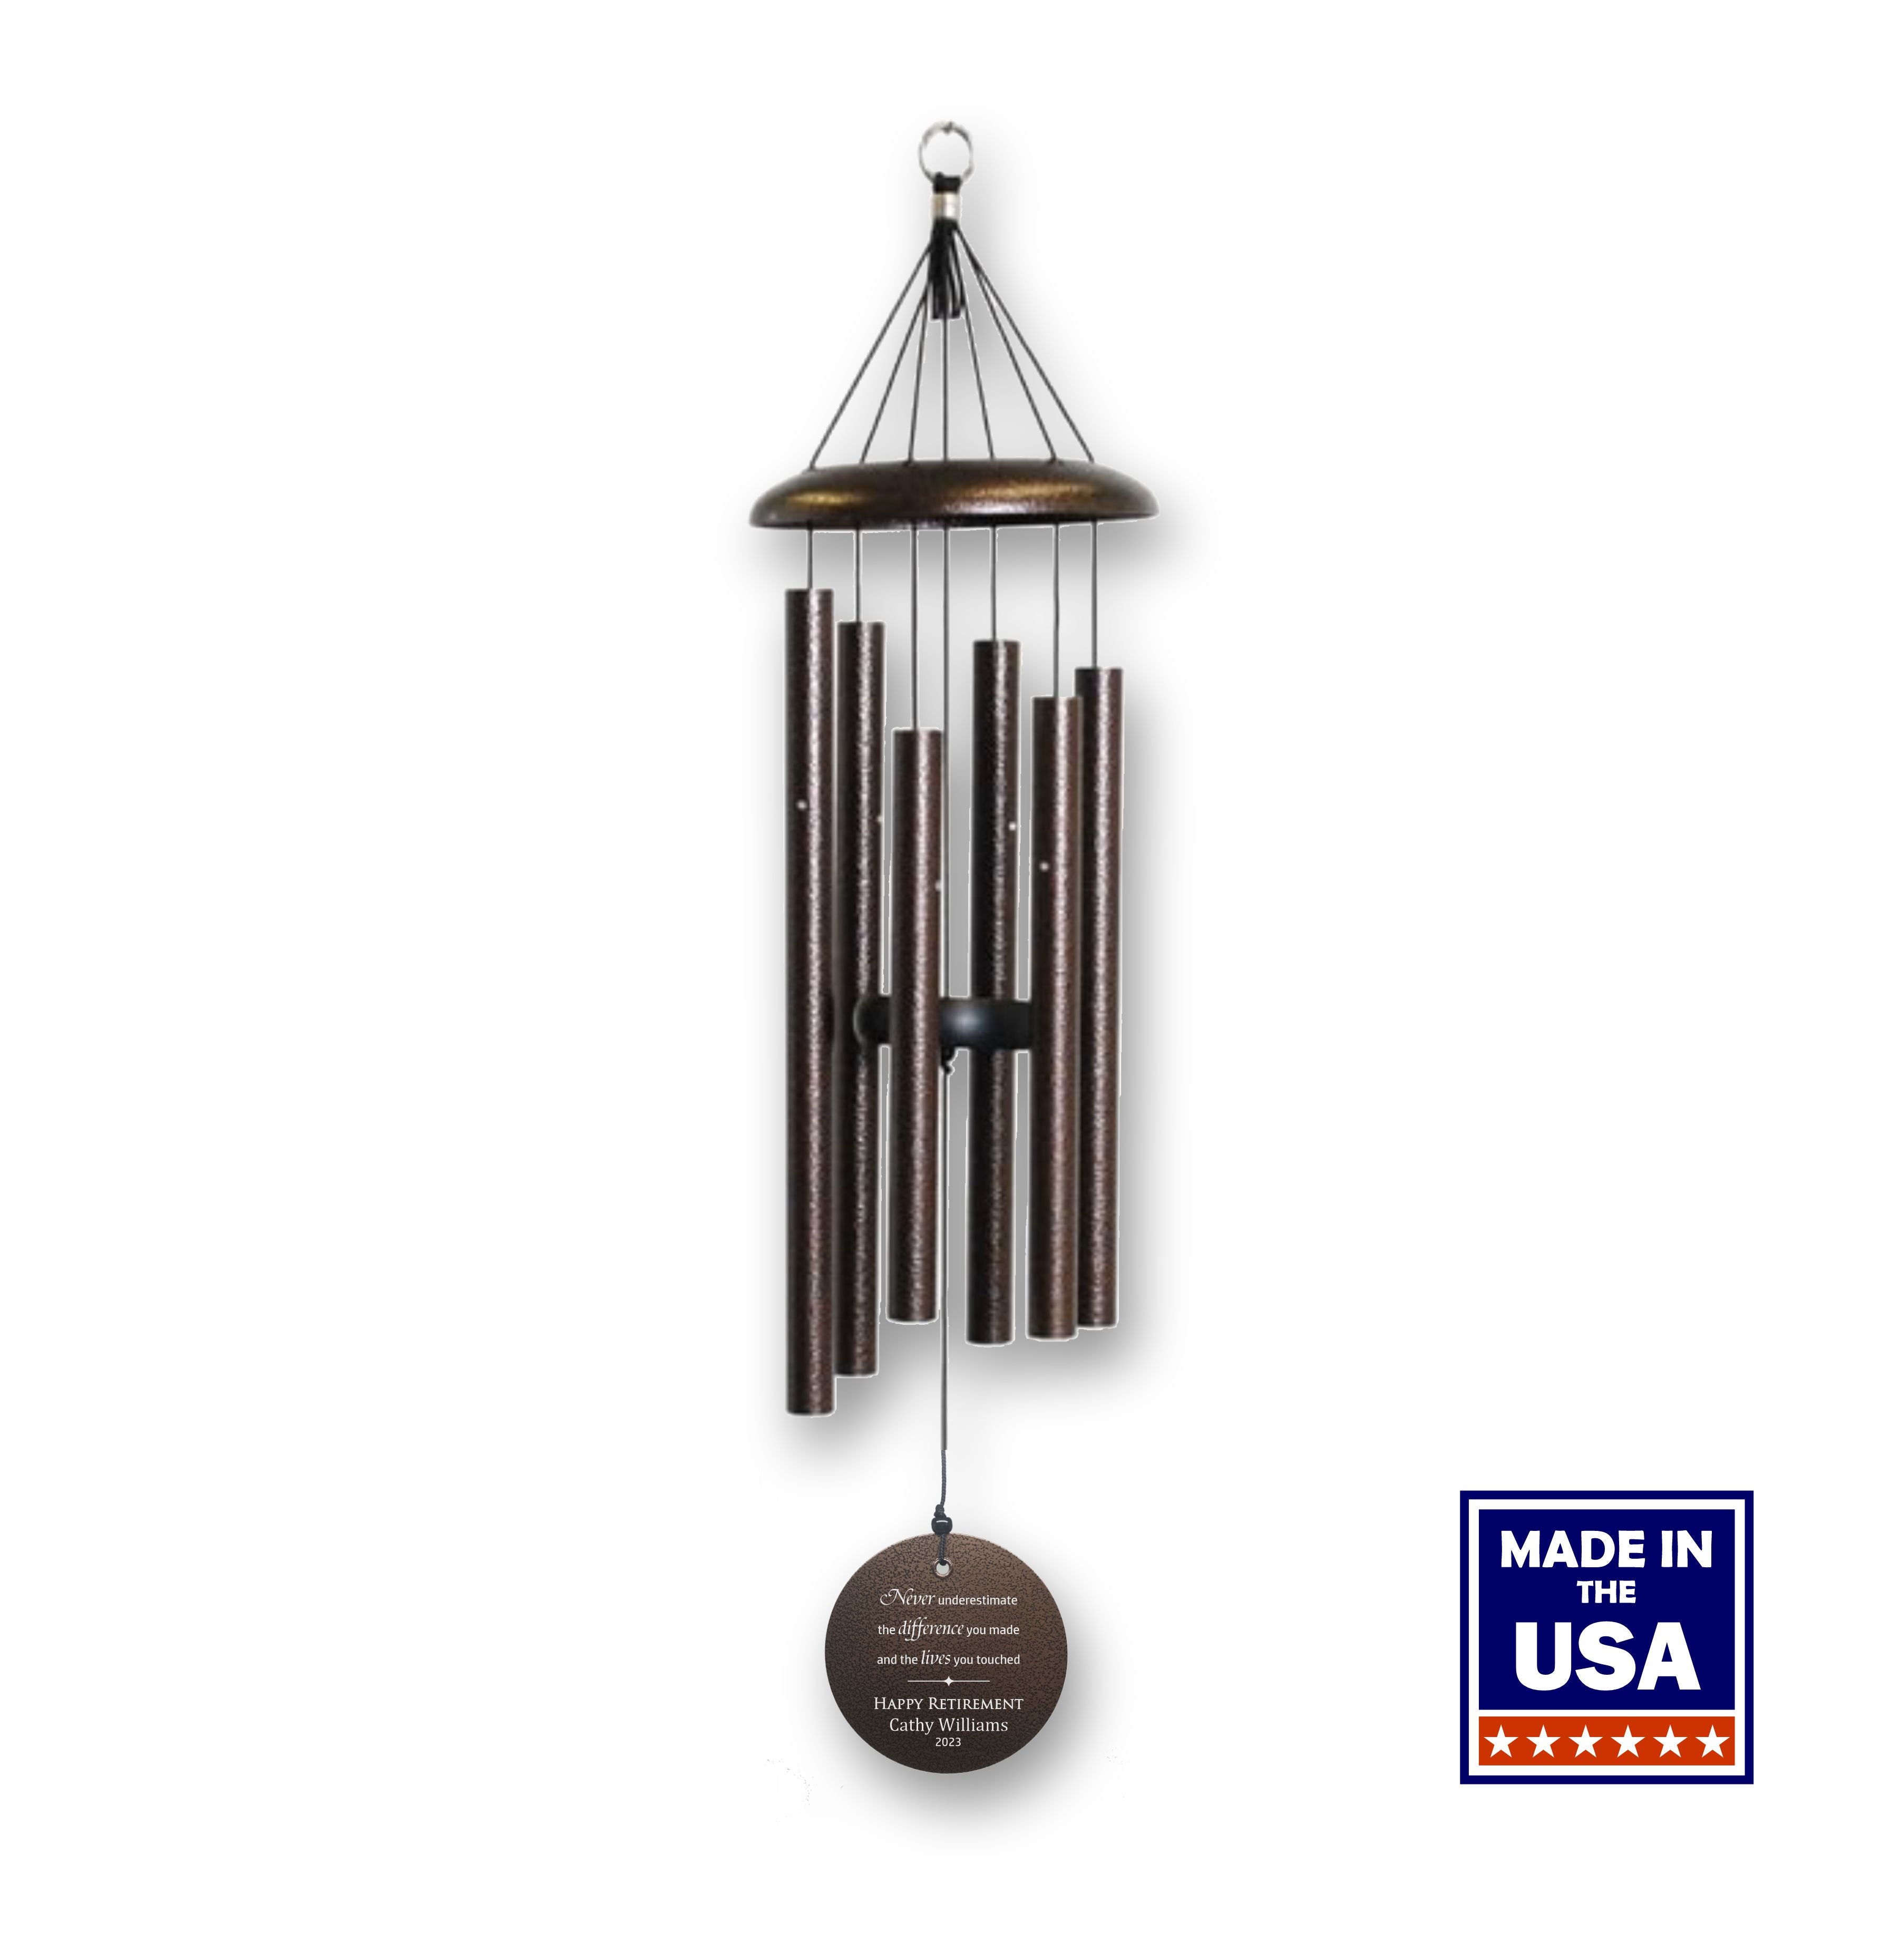 Never Underestimate the Difference Retirement Wind Chime | Corinthian Bells | Made in USA